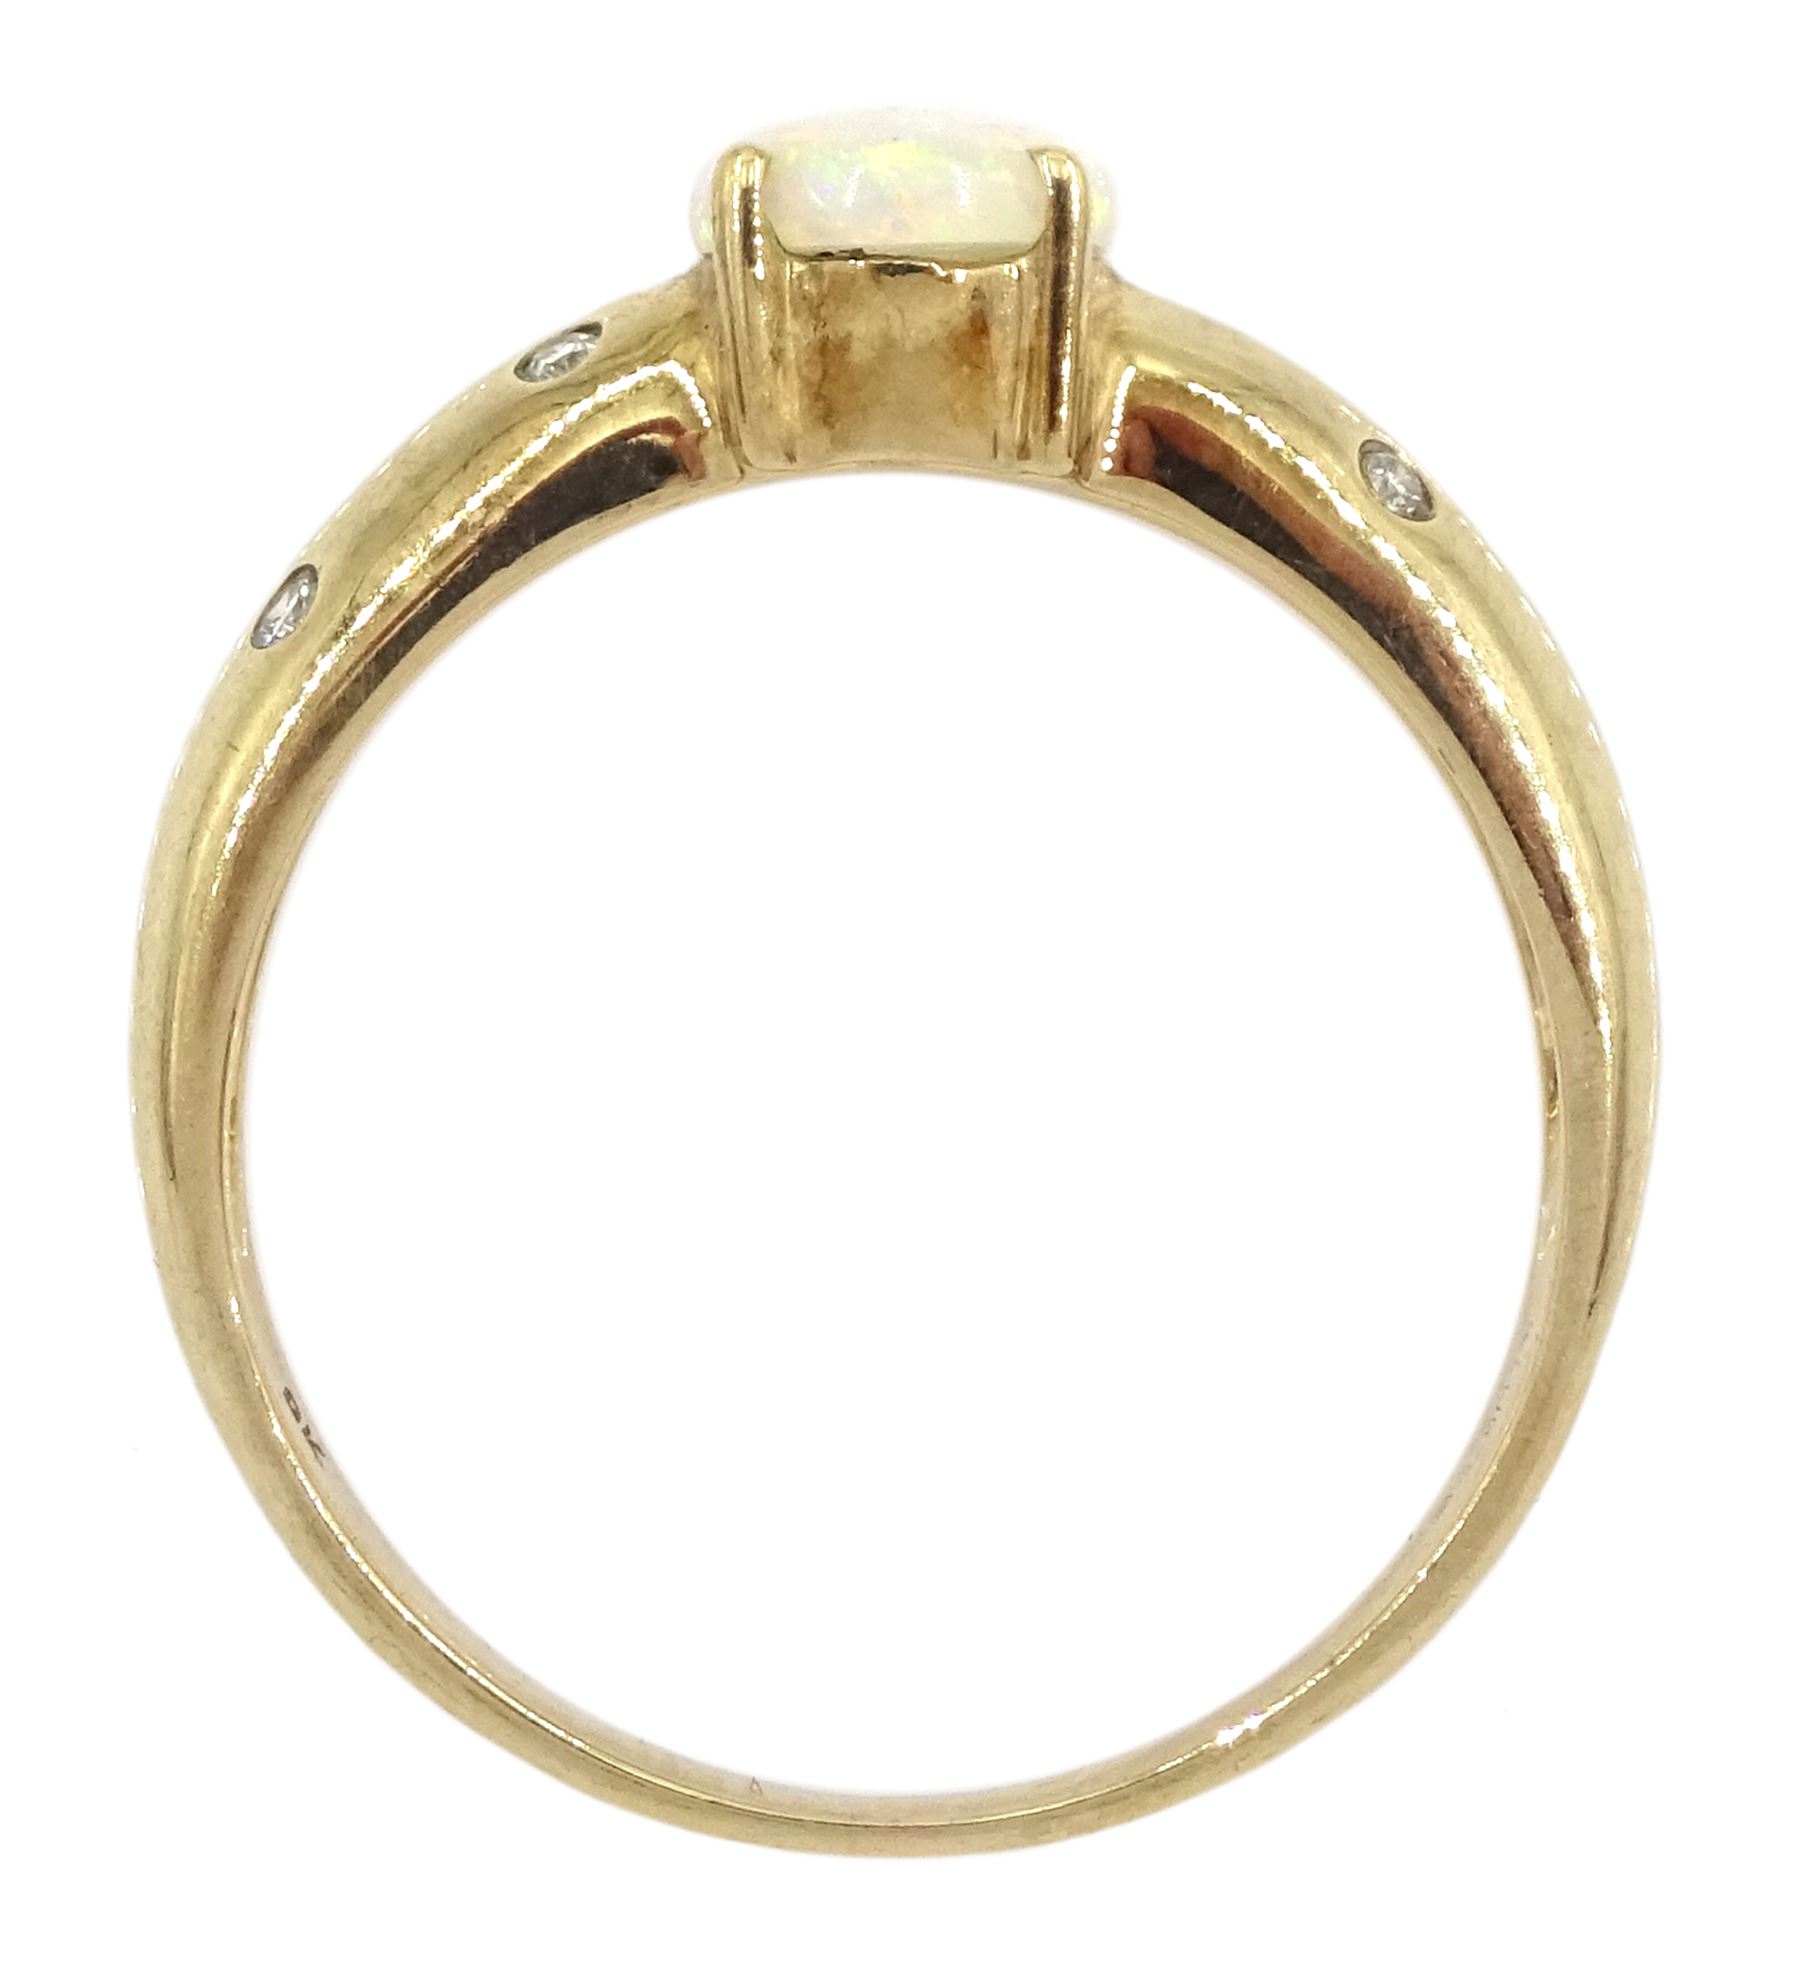 9ct gold opal ring - Image 4 of 4